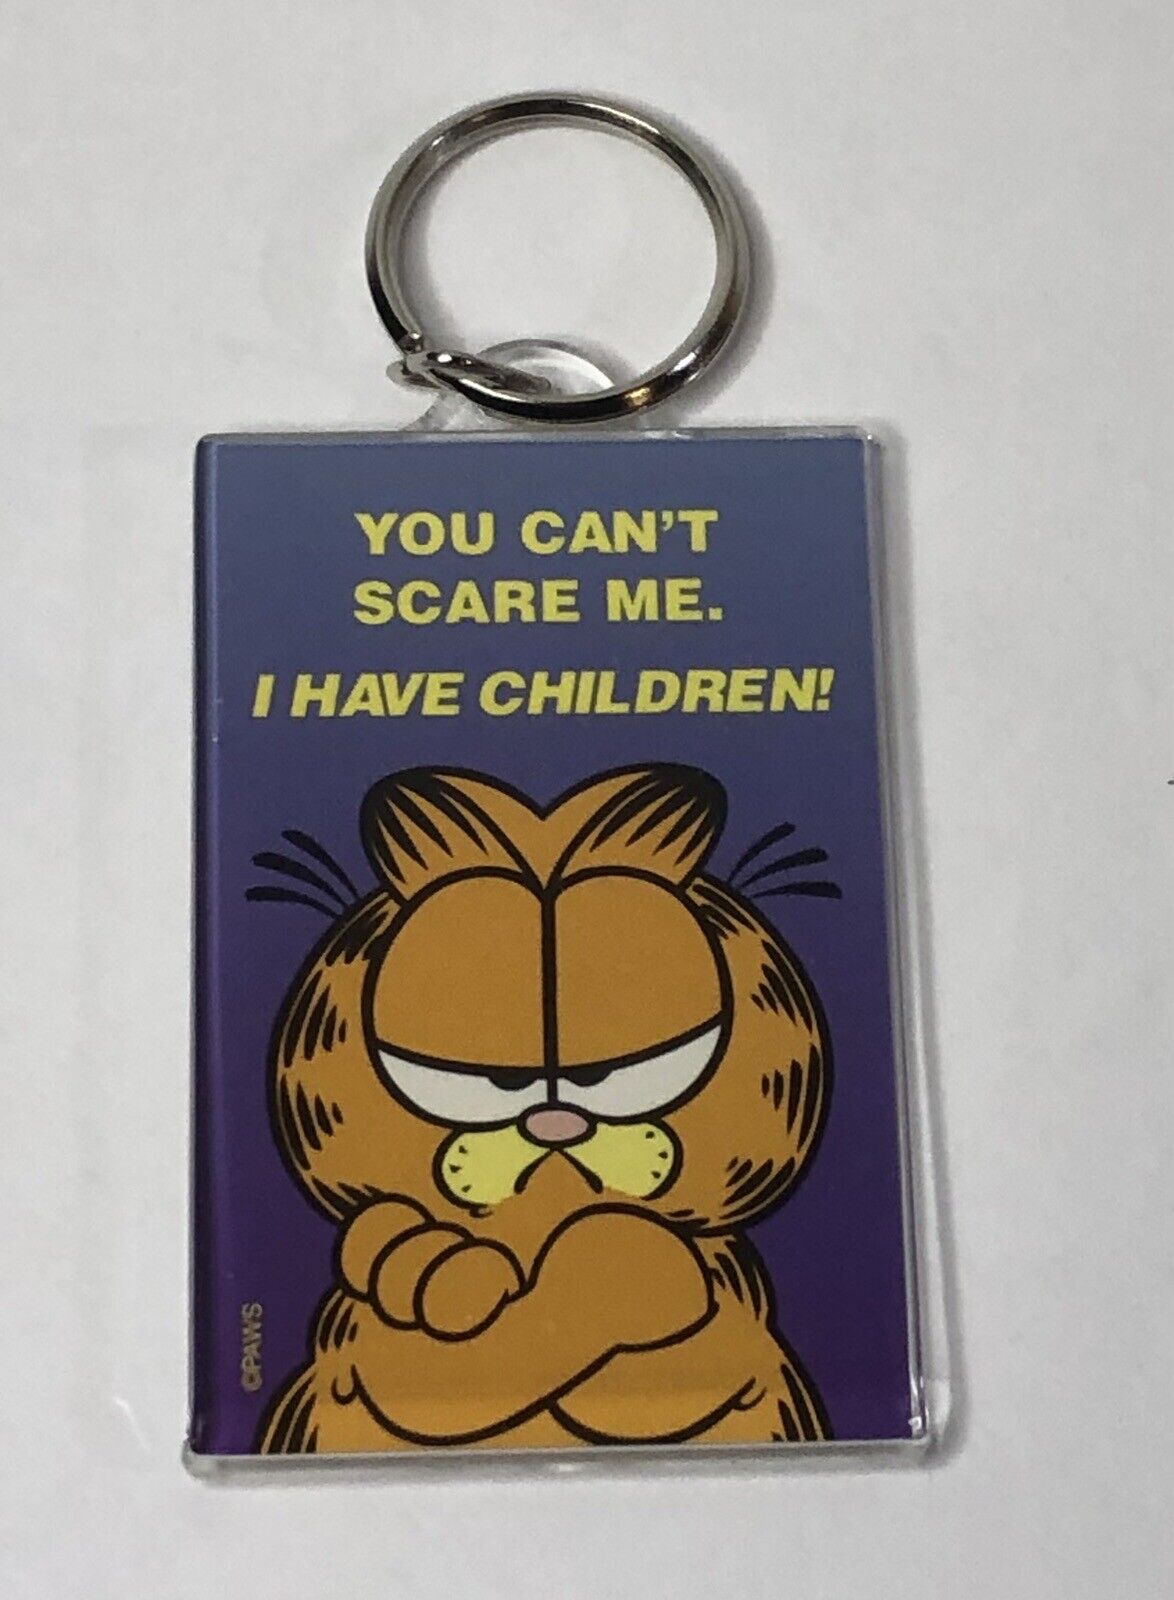 Vintage PAWS Garfield Funny Keychain You Can’t Scare Me. I Have Children